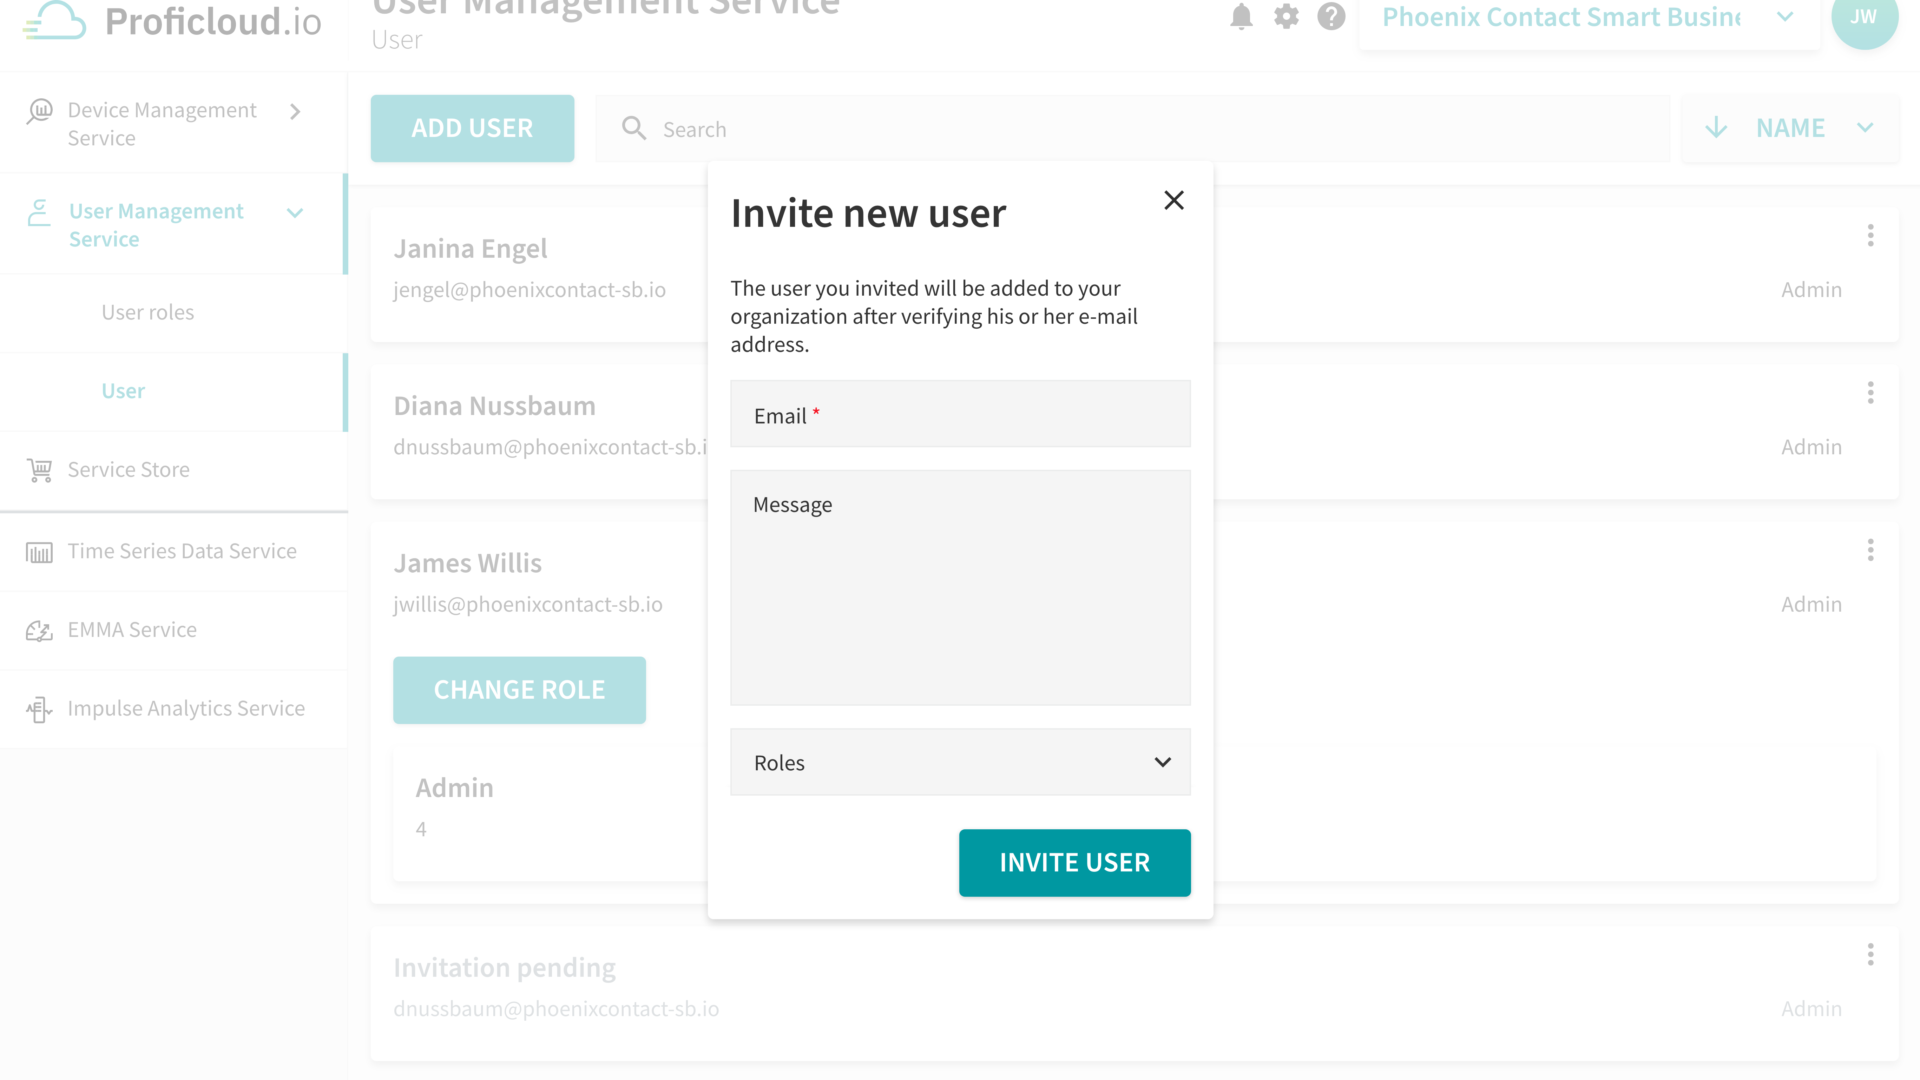 Inviting new users is easily done in a few clicks